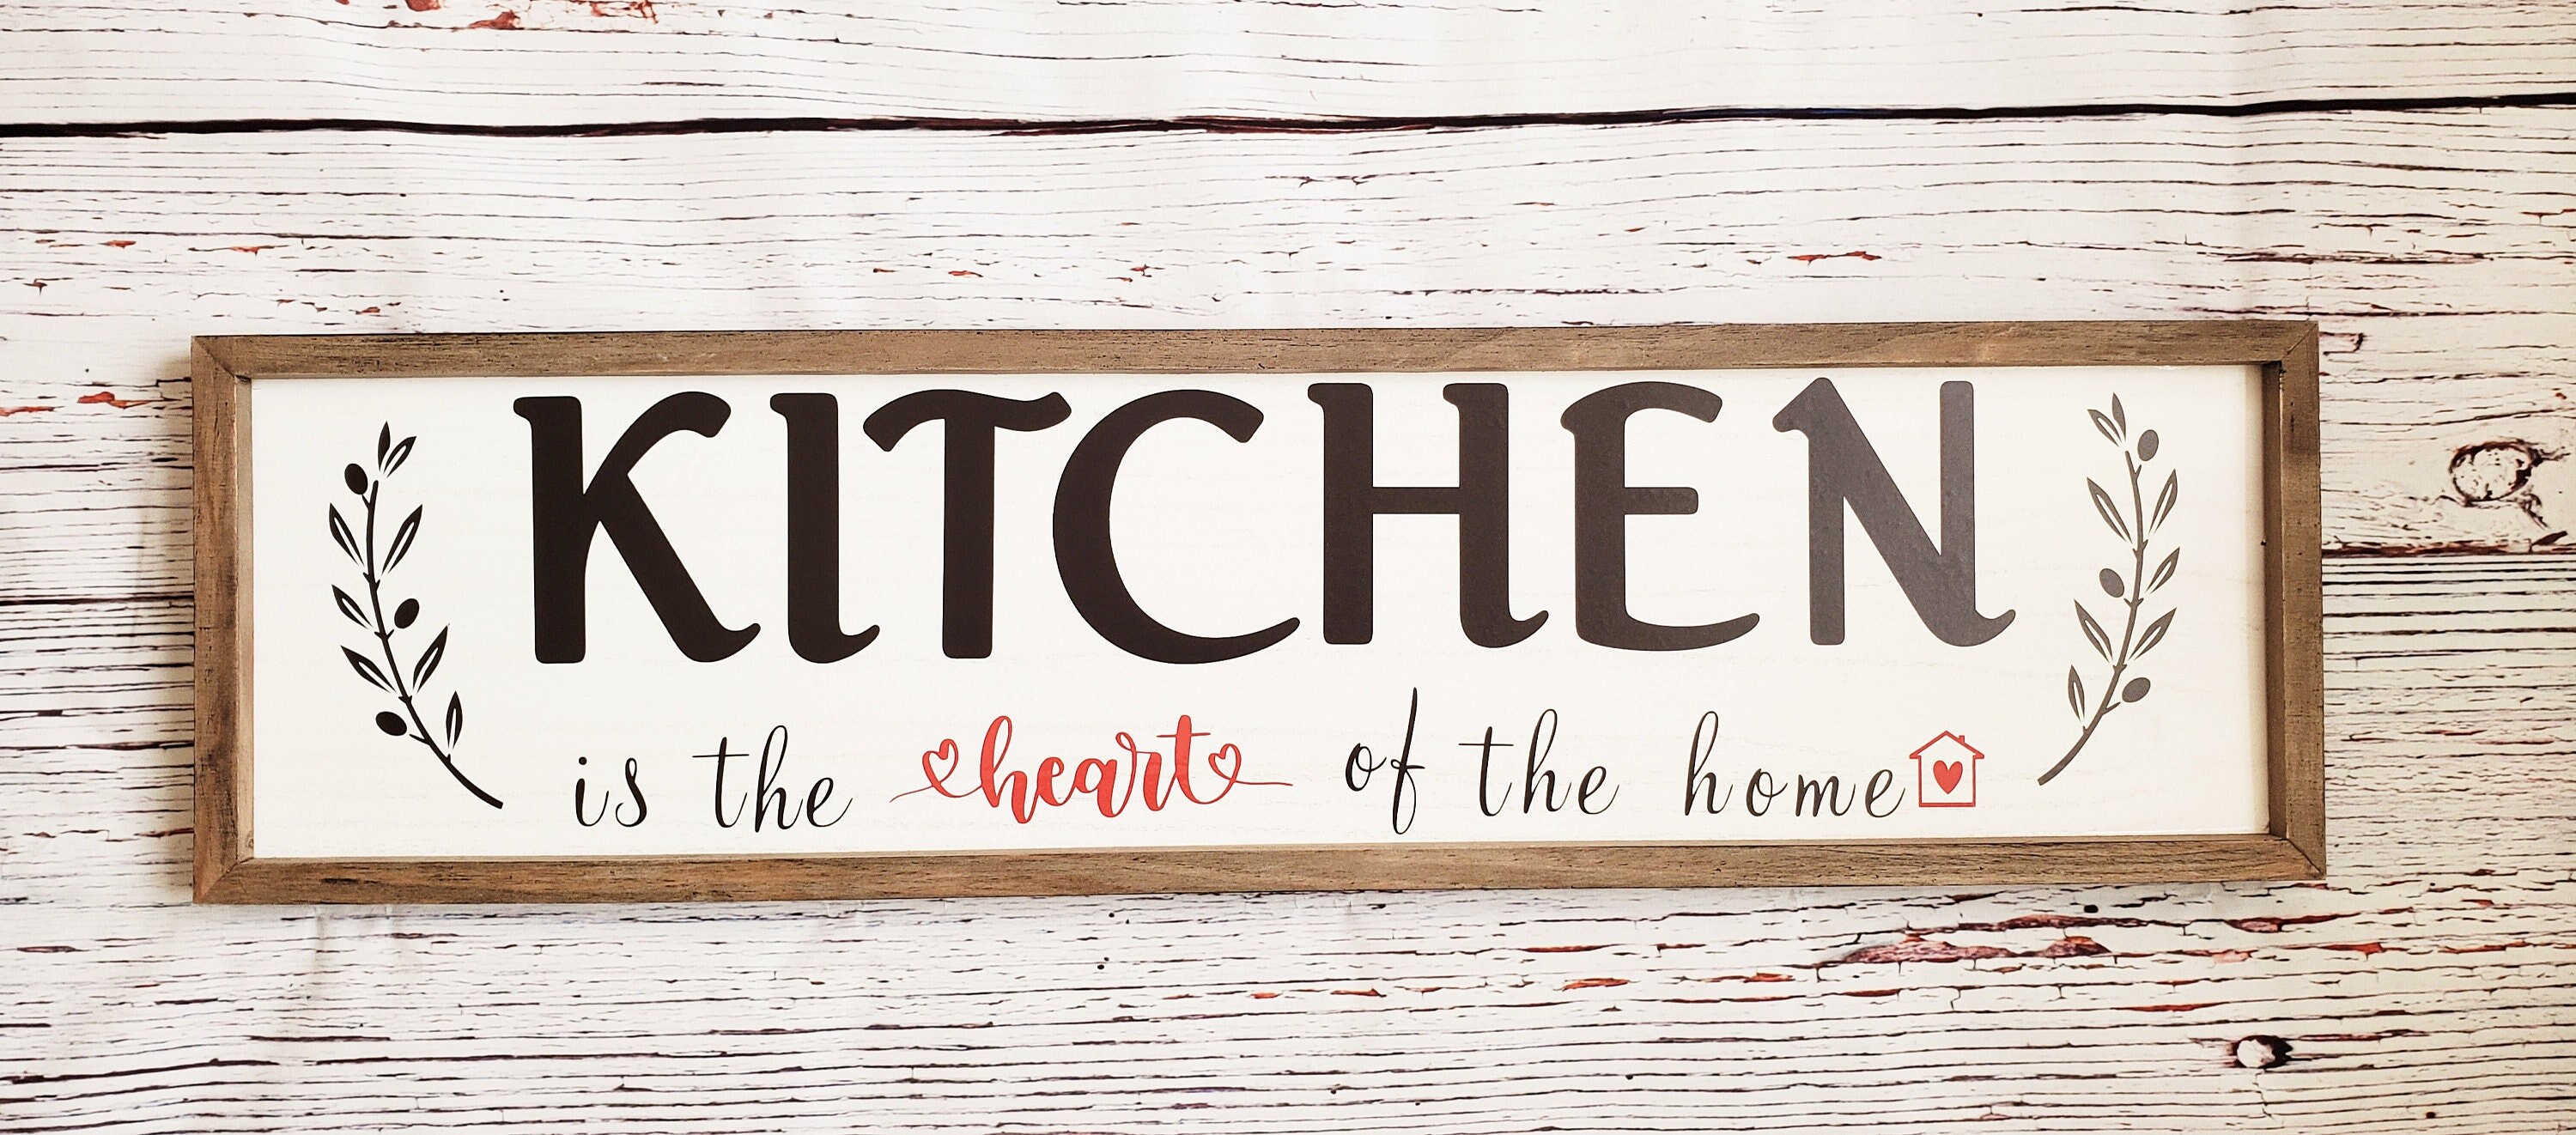  Kitchen Sign Set Kitchen Wall Decor The Heart of The Home Sign  Wood Rustic Buffalo Plaid Kitchen Decoration Fork and Spoon Farmhouse  Kitchen Wall Decor for Housewarming Kitchen Decor (Black